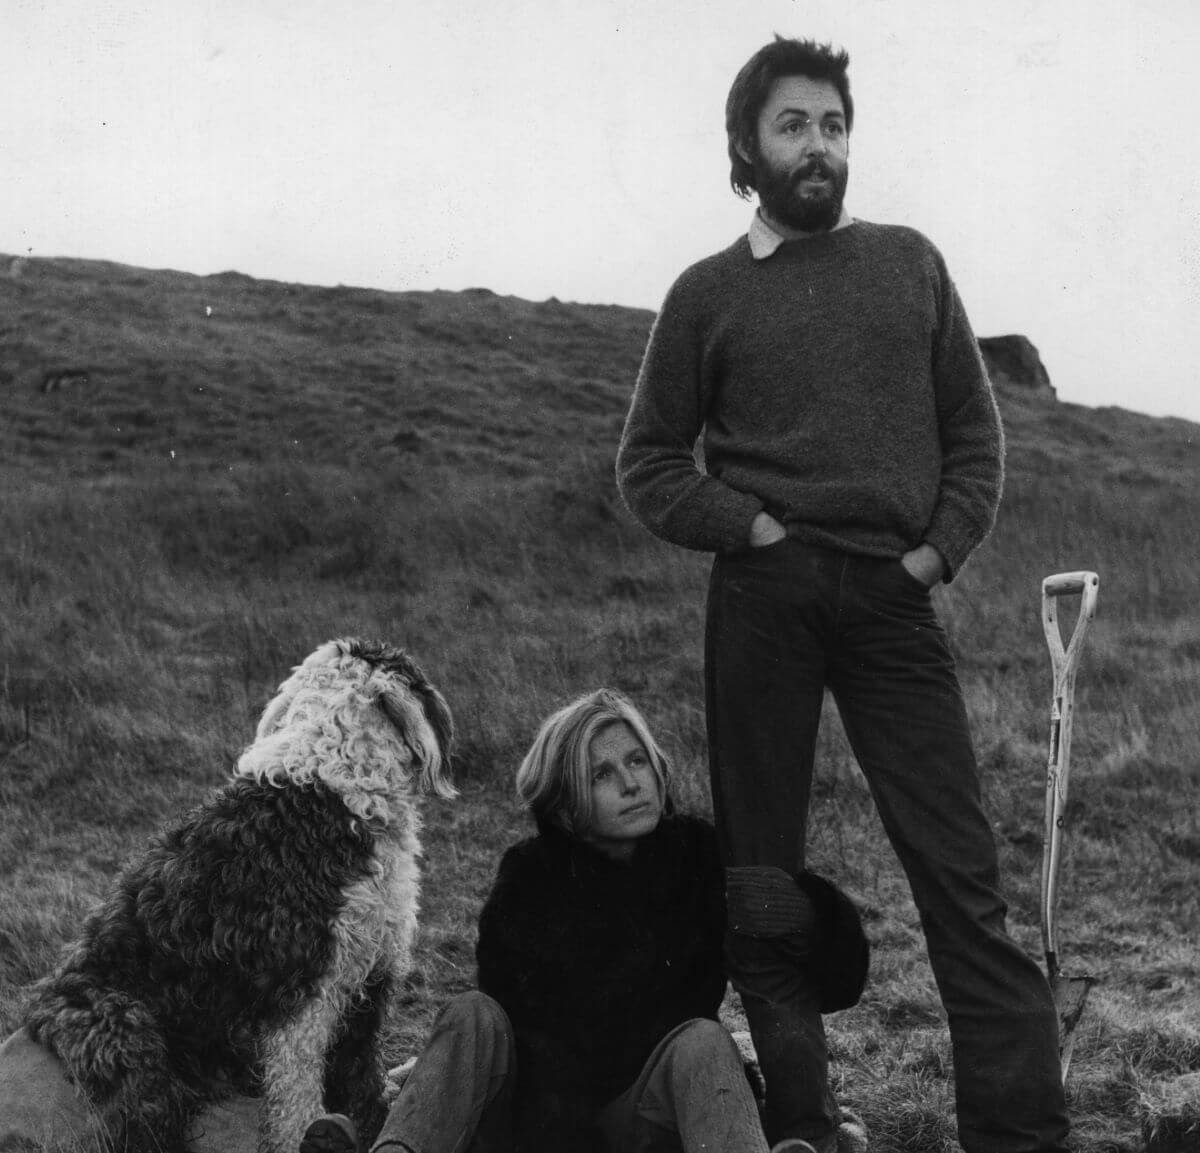 A black and white picture of Linda McCartney sitting on the ground next to a dog and Paul McCartney, who stands next to a shovel.